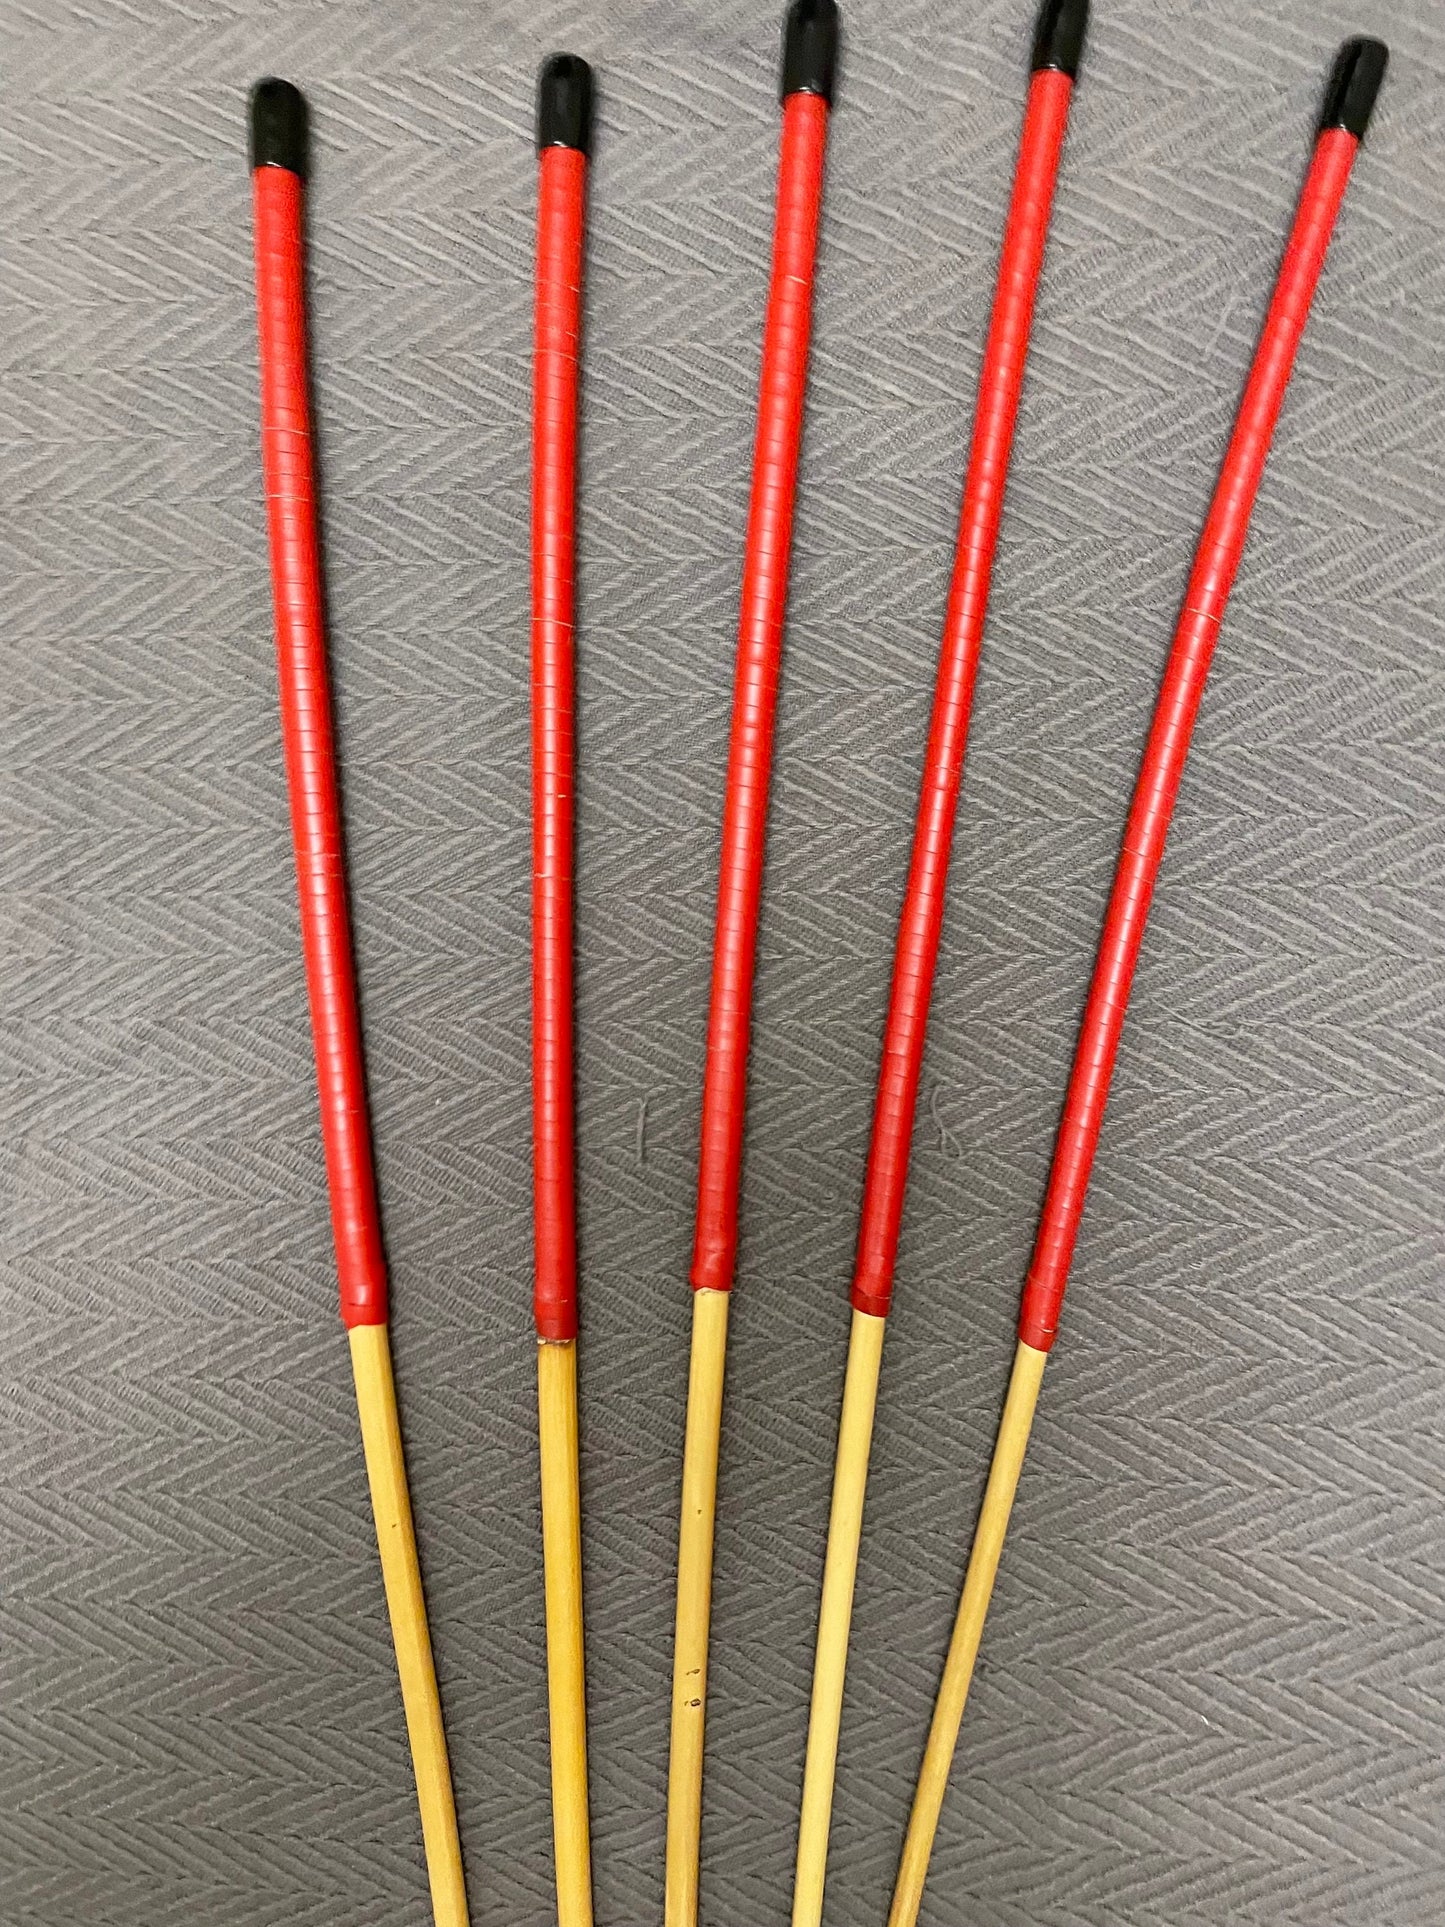 Set of 5 Long Whippy Dragon Canes with Red Kangaroo Leather Handles